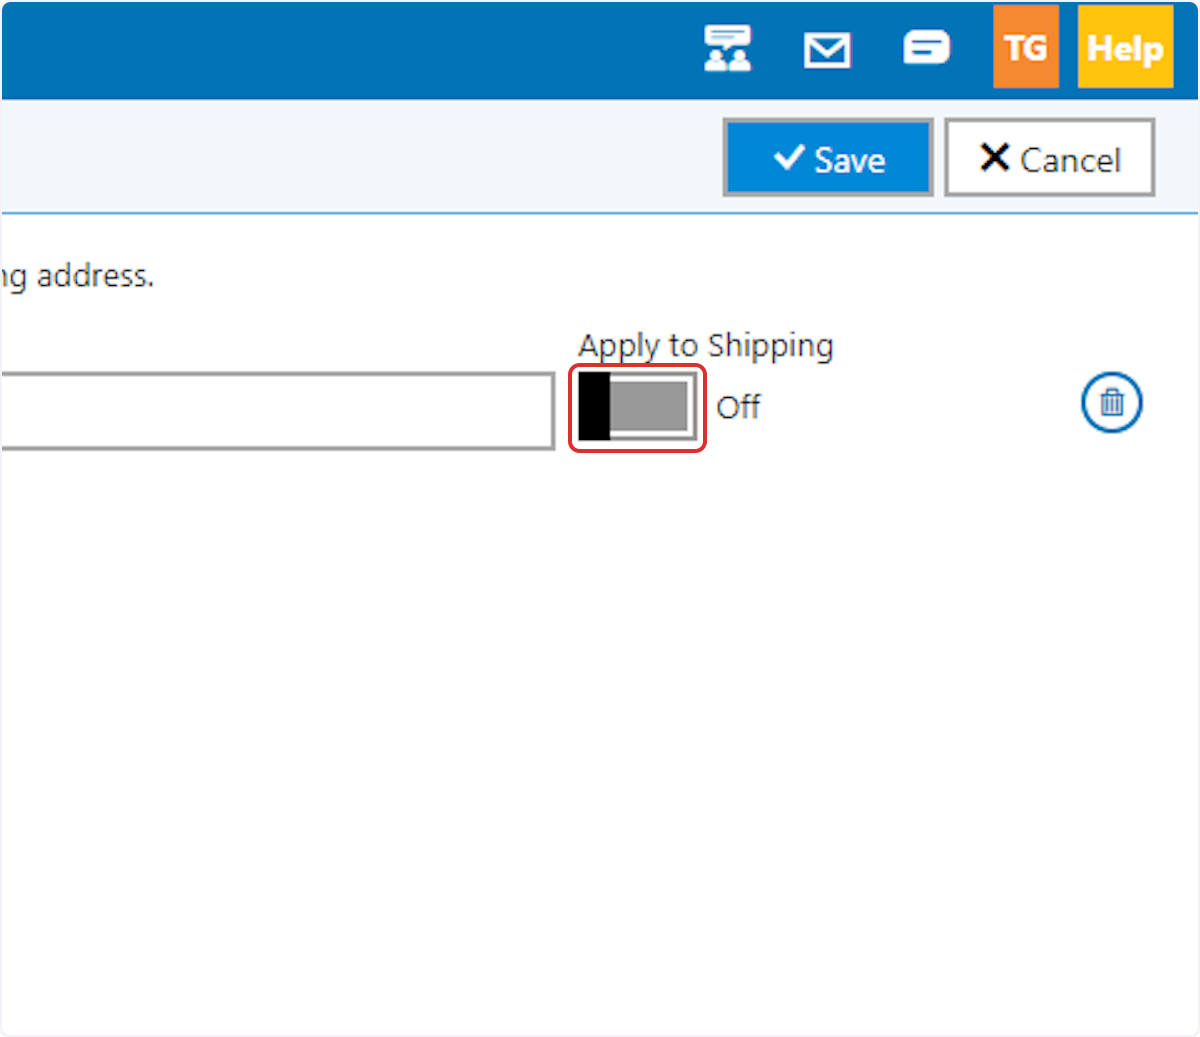 If you wish to apply the tax to shipping charges as well as merchandise, toggle the 'Apply to Shipping' toggle to the ON position.